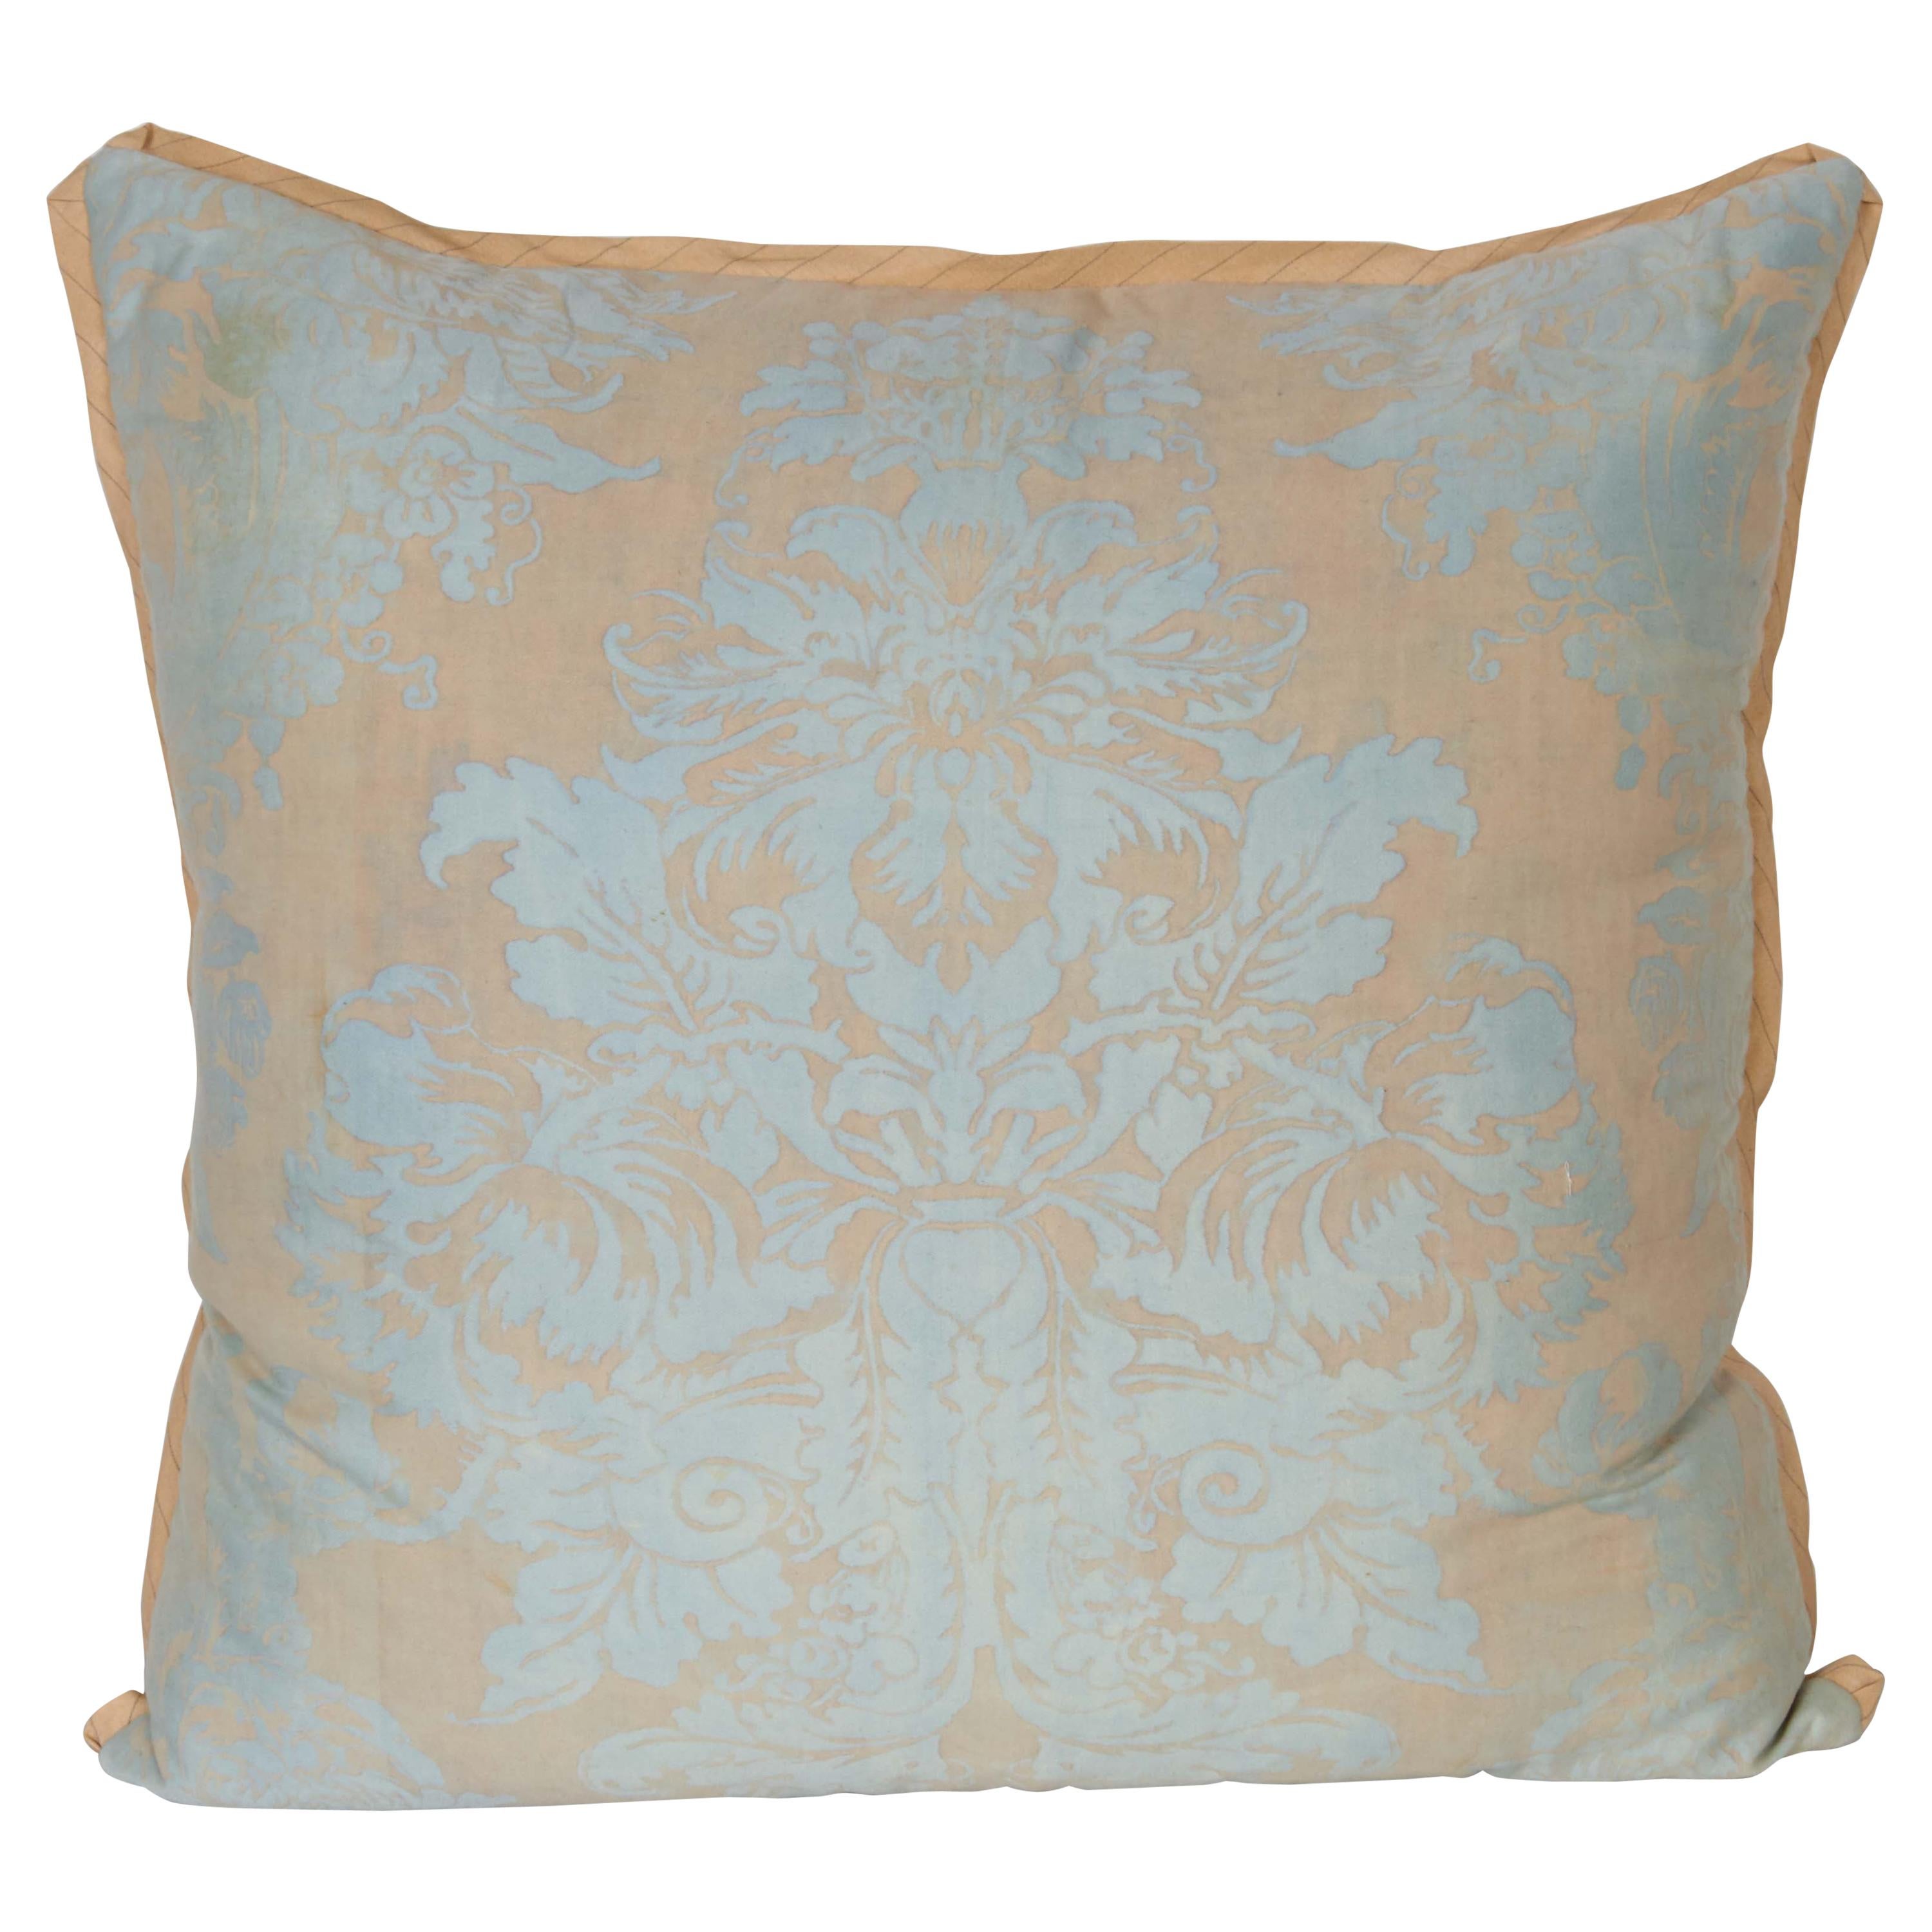 Set of Fortuny Fabric Cushions in the Dandolo Pattern